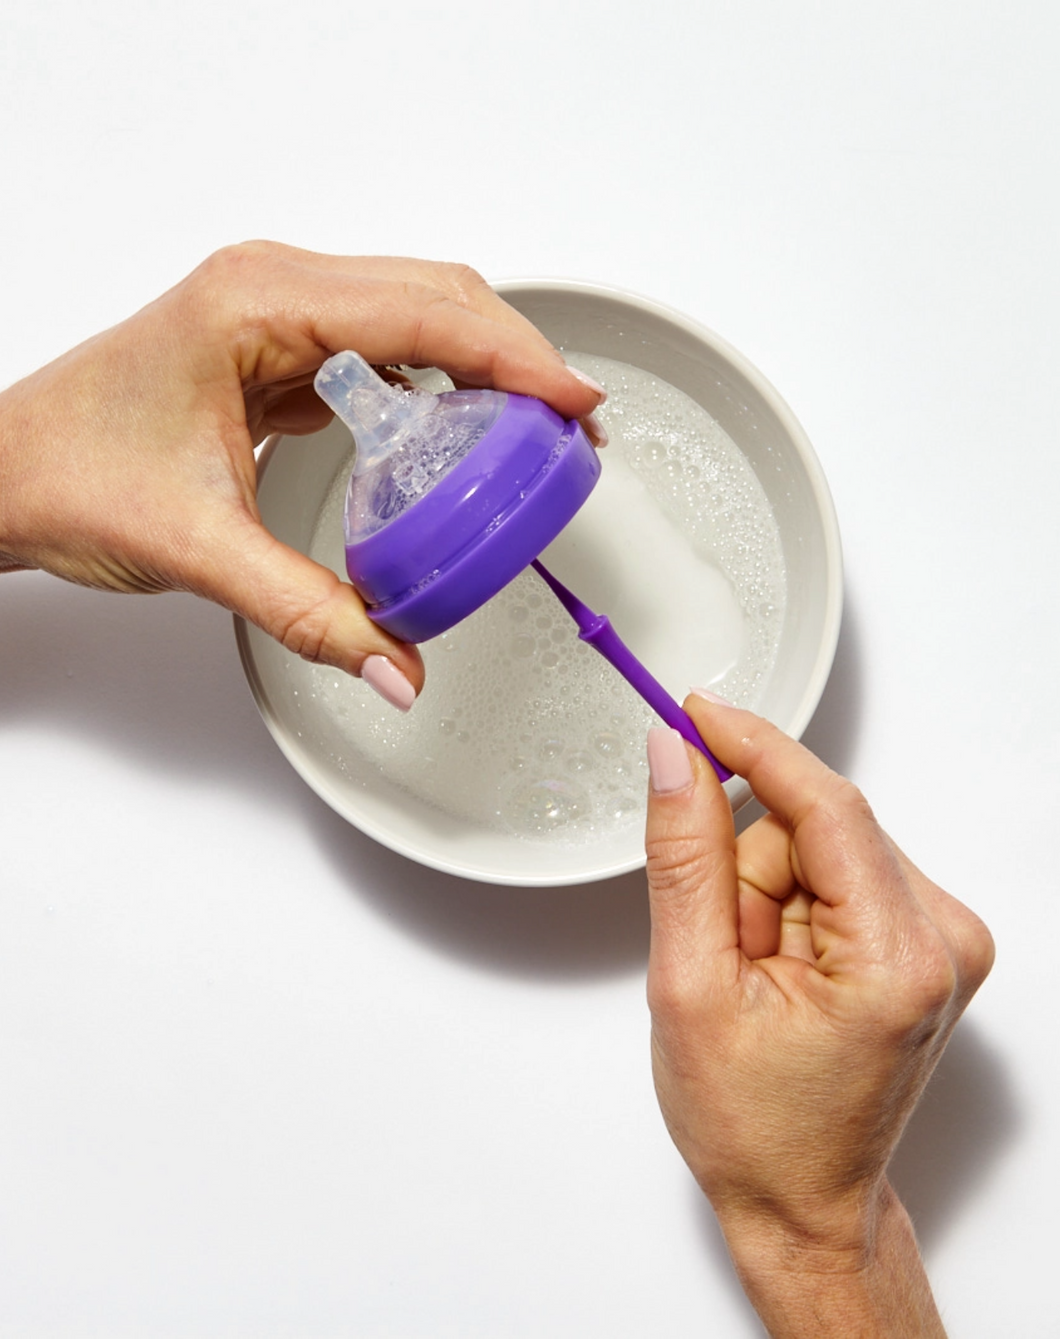 Demo image of how to clean the Momi nipple